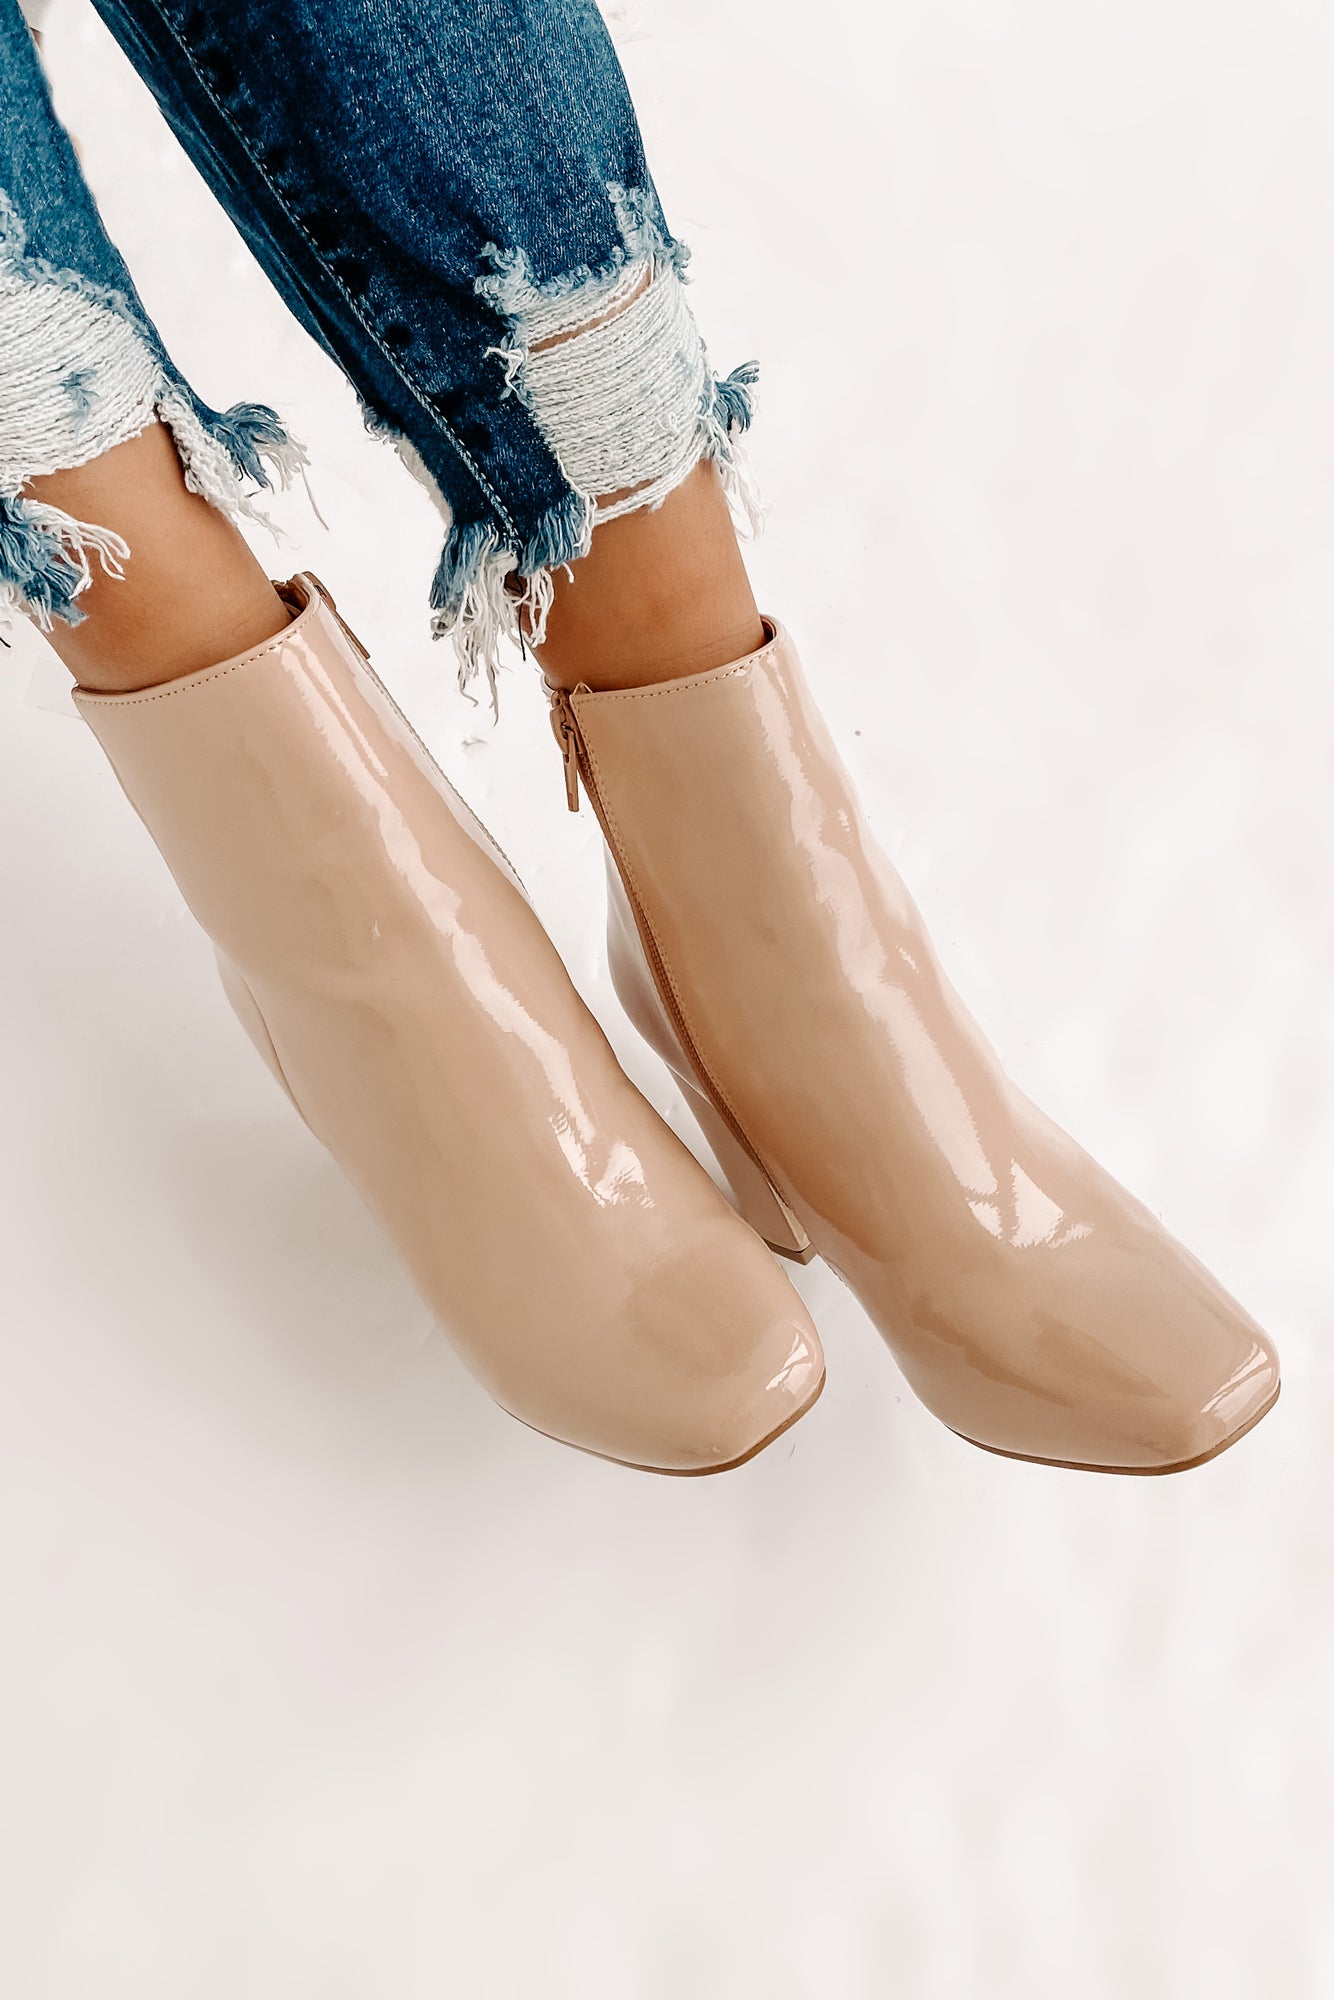 Show Up & Show Off Patent Leather Heeled Ankle Booties (Nude Patent) - NanaMacs